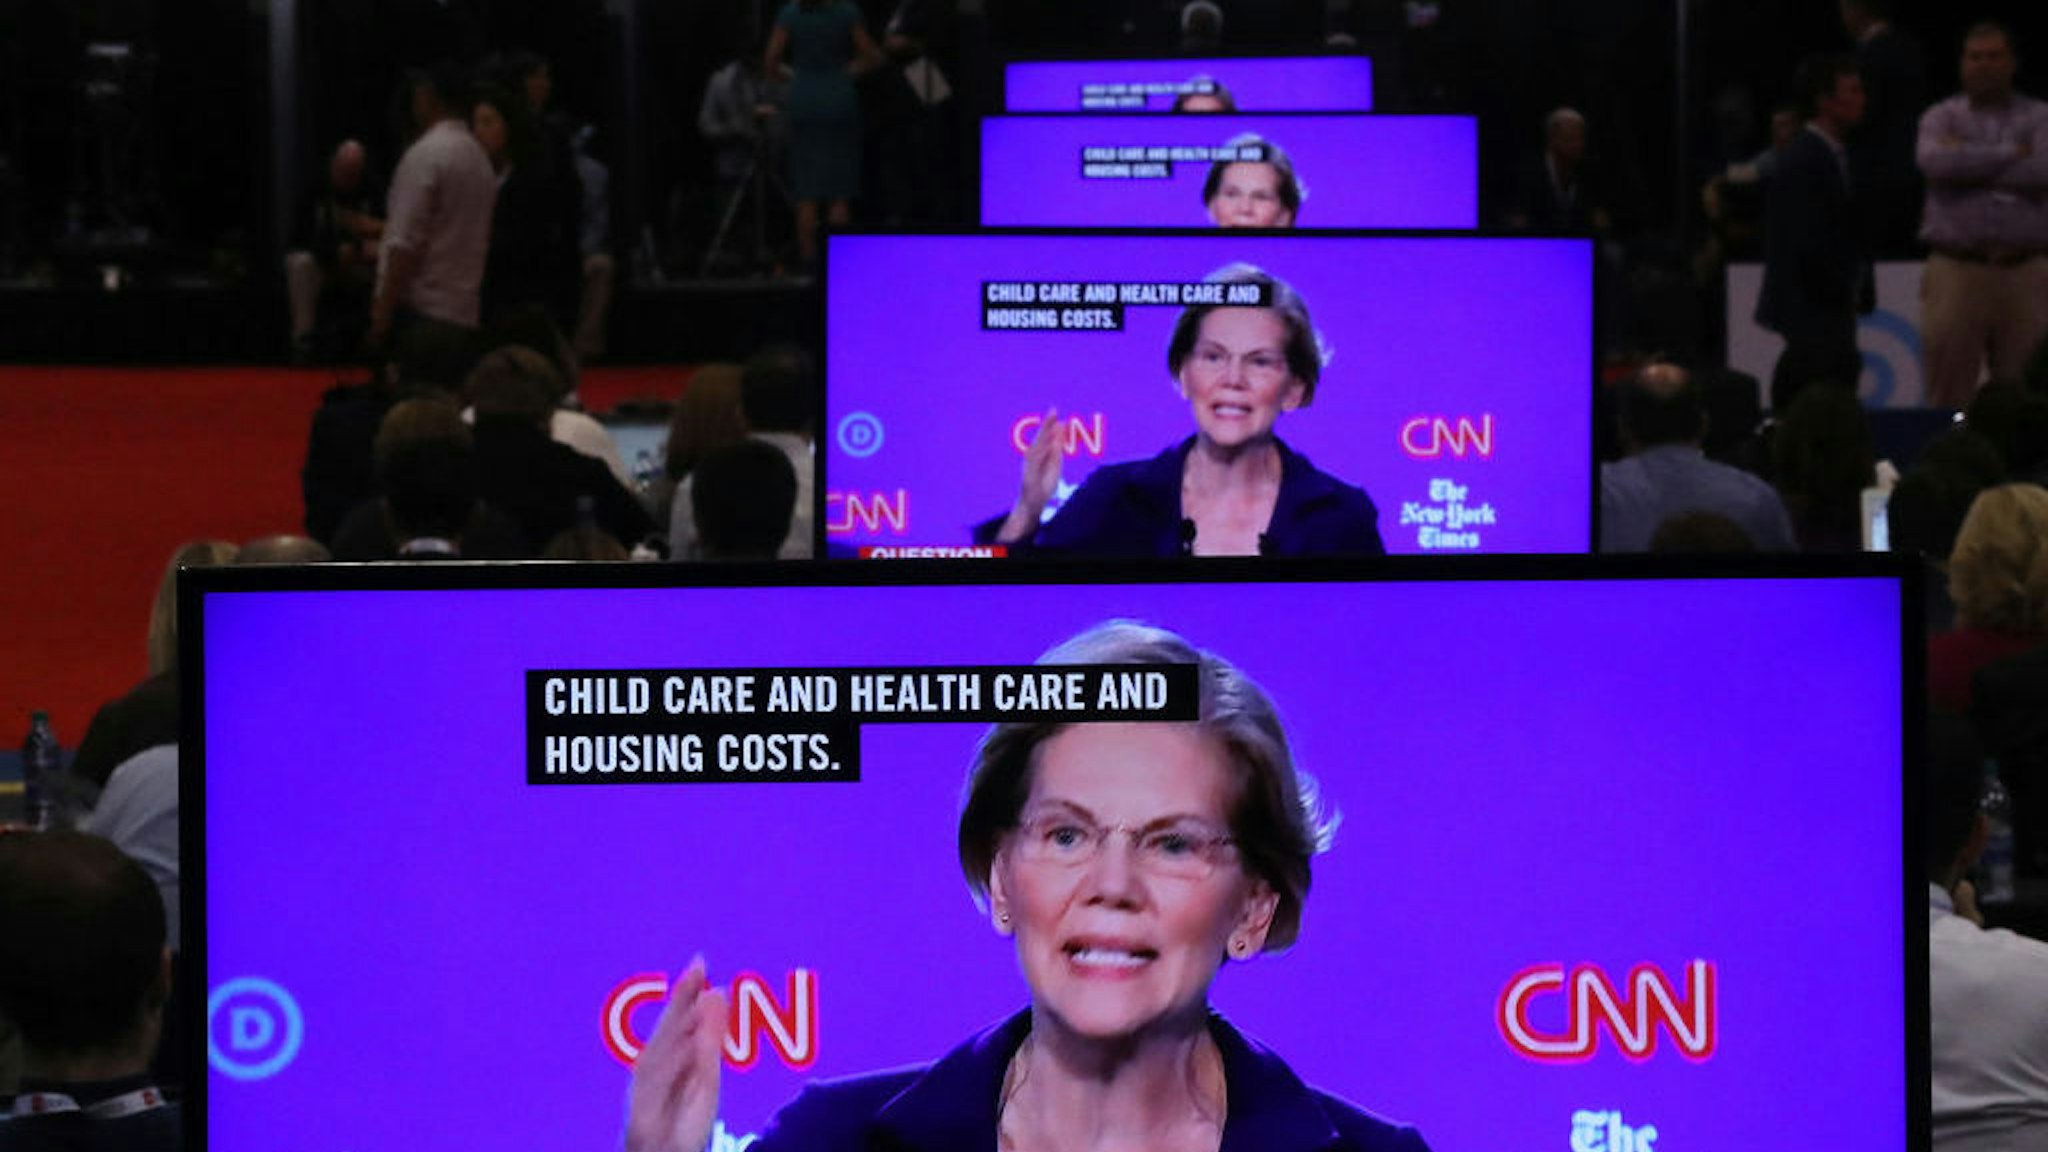 Sen. Elizabeth Warren (D-MA) appear on television screens in the Media Center during the Democratic Presidential Debate at Otterbein University on October 15, 2019 in Westerville, Ohio. A record 12 presidential hopefuls are participating in the debate hosted by CNN and The New York Times. (Photo by Chip Somodevilla/Getty Images)